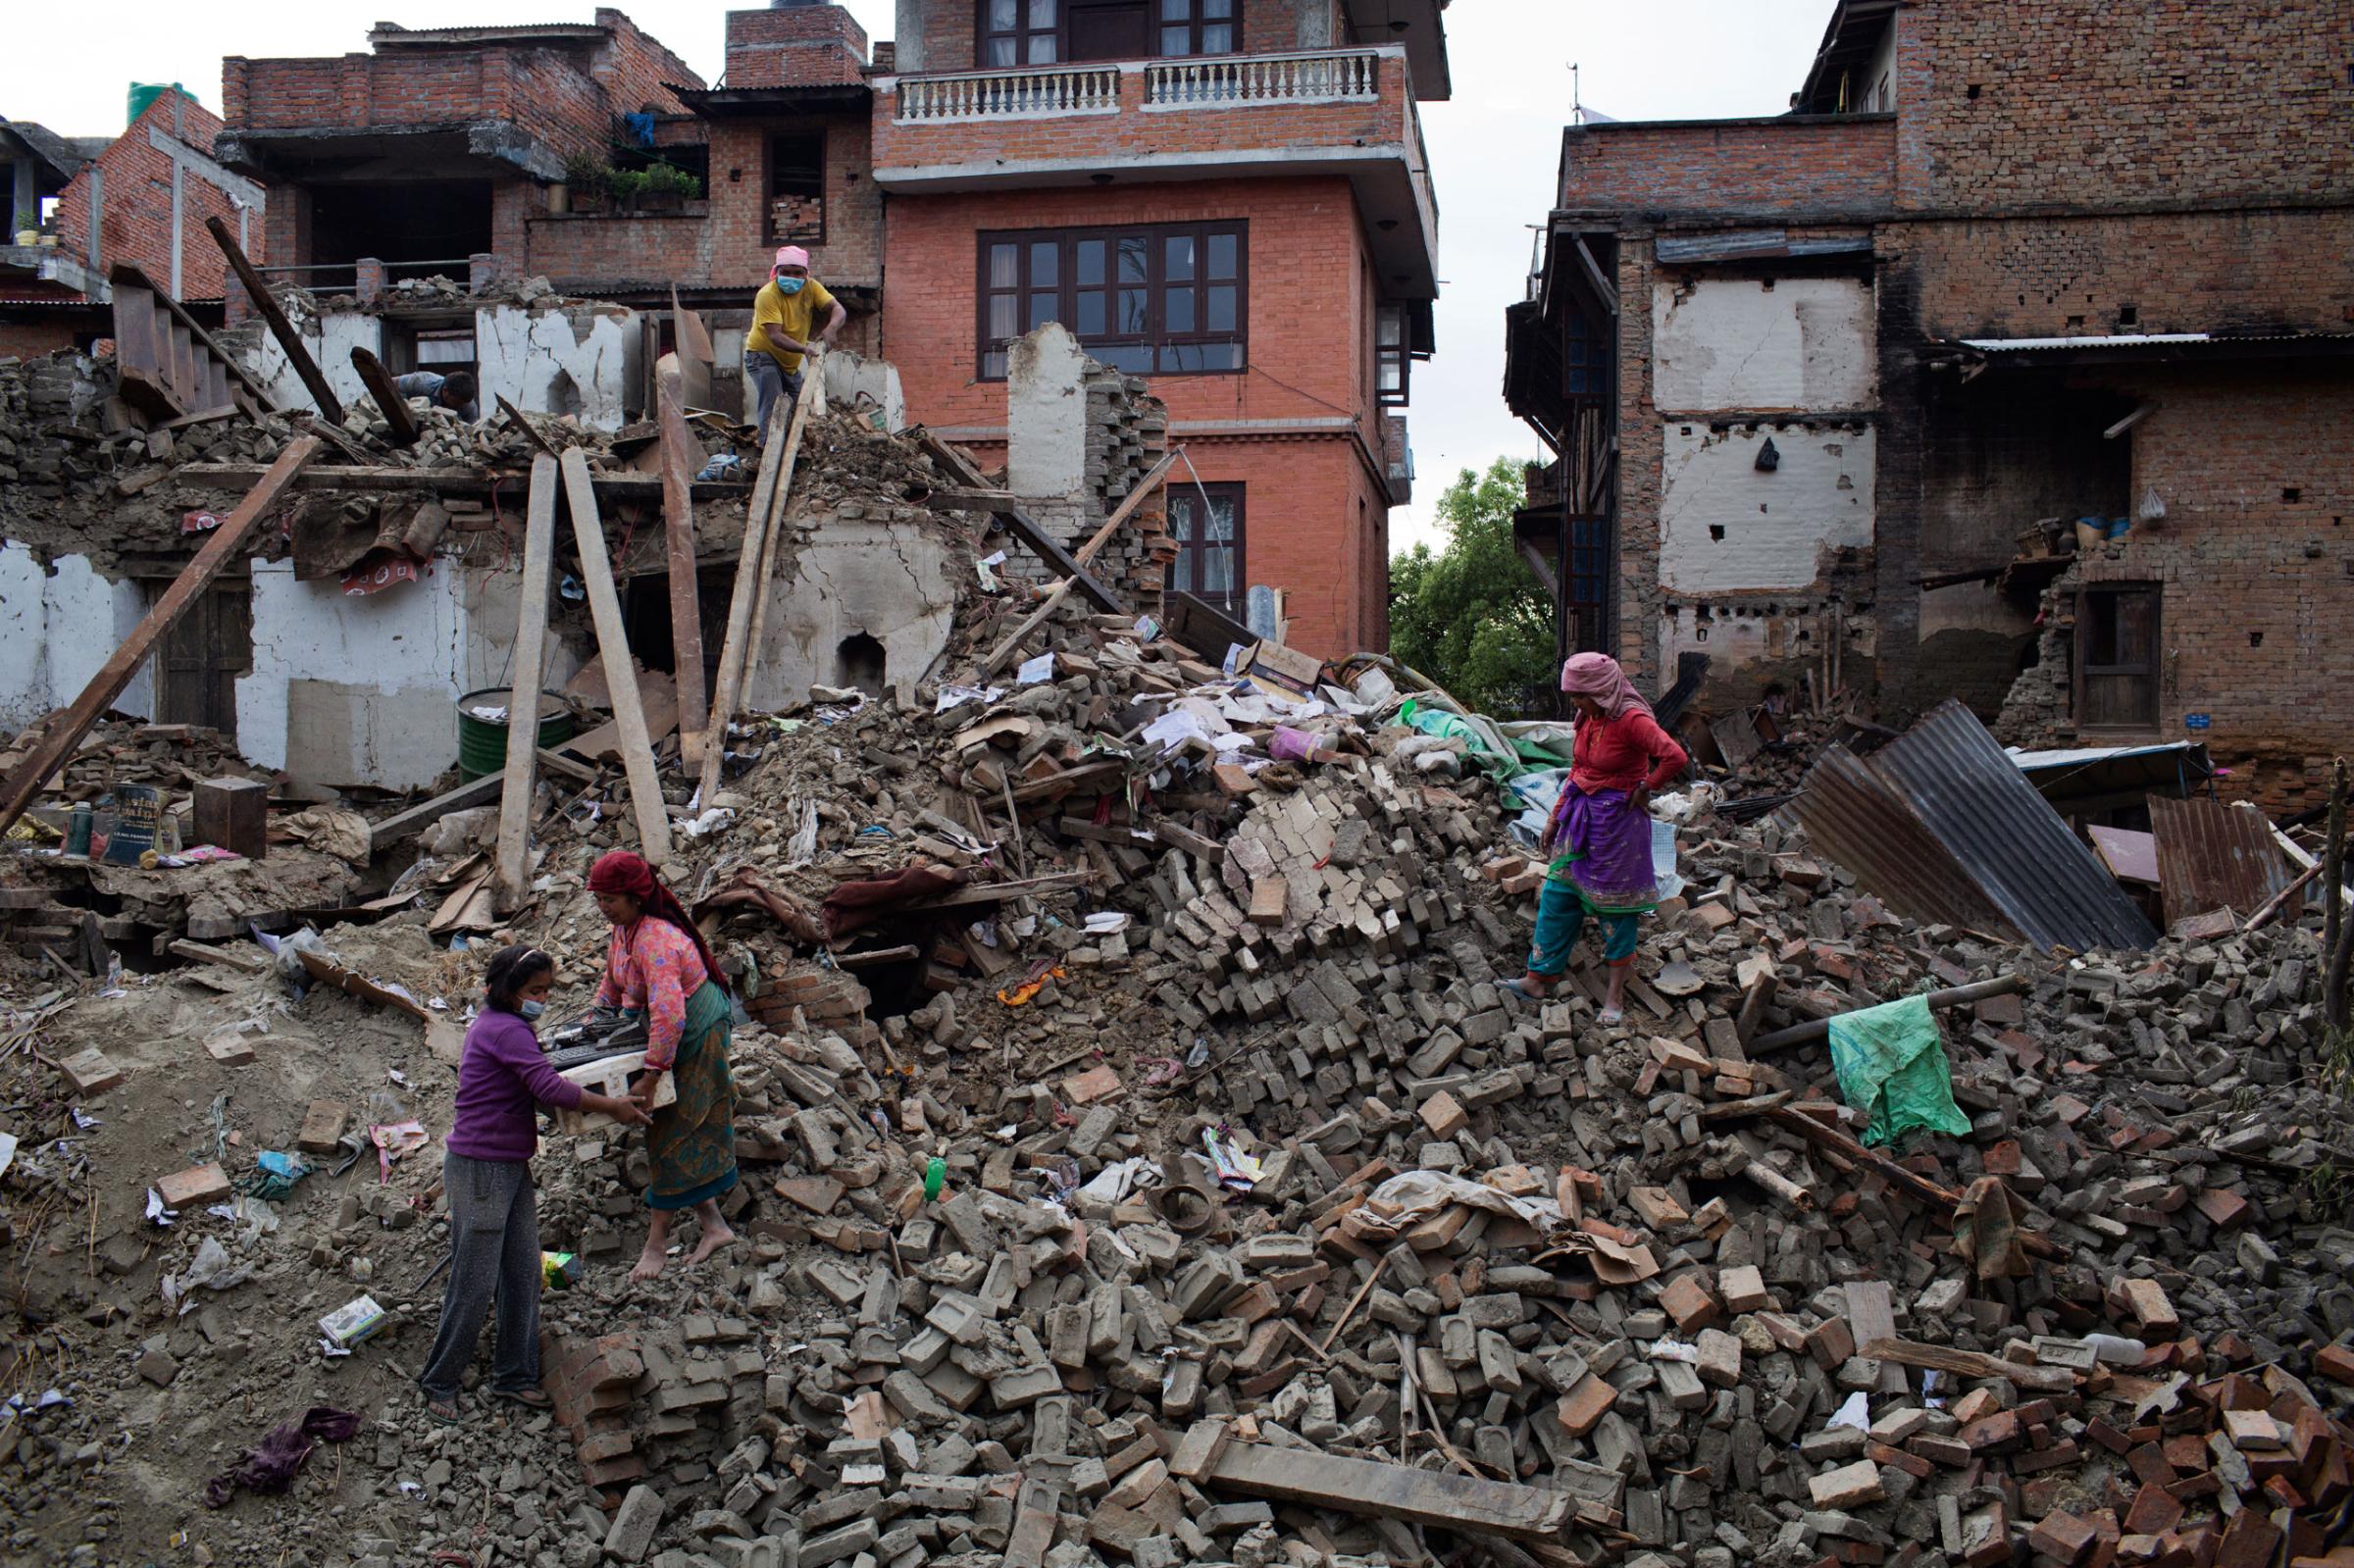 Nepalis retrieve belongings from earthquake damaged homes in the ancient city of Bhaktapur in the Kathmandu Valley on April 29, 2015. Nepal had a severe earthquake on April 25th. Photo by Adam Ferguson for Time